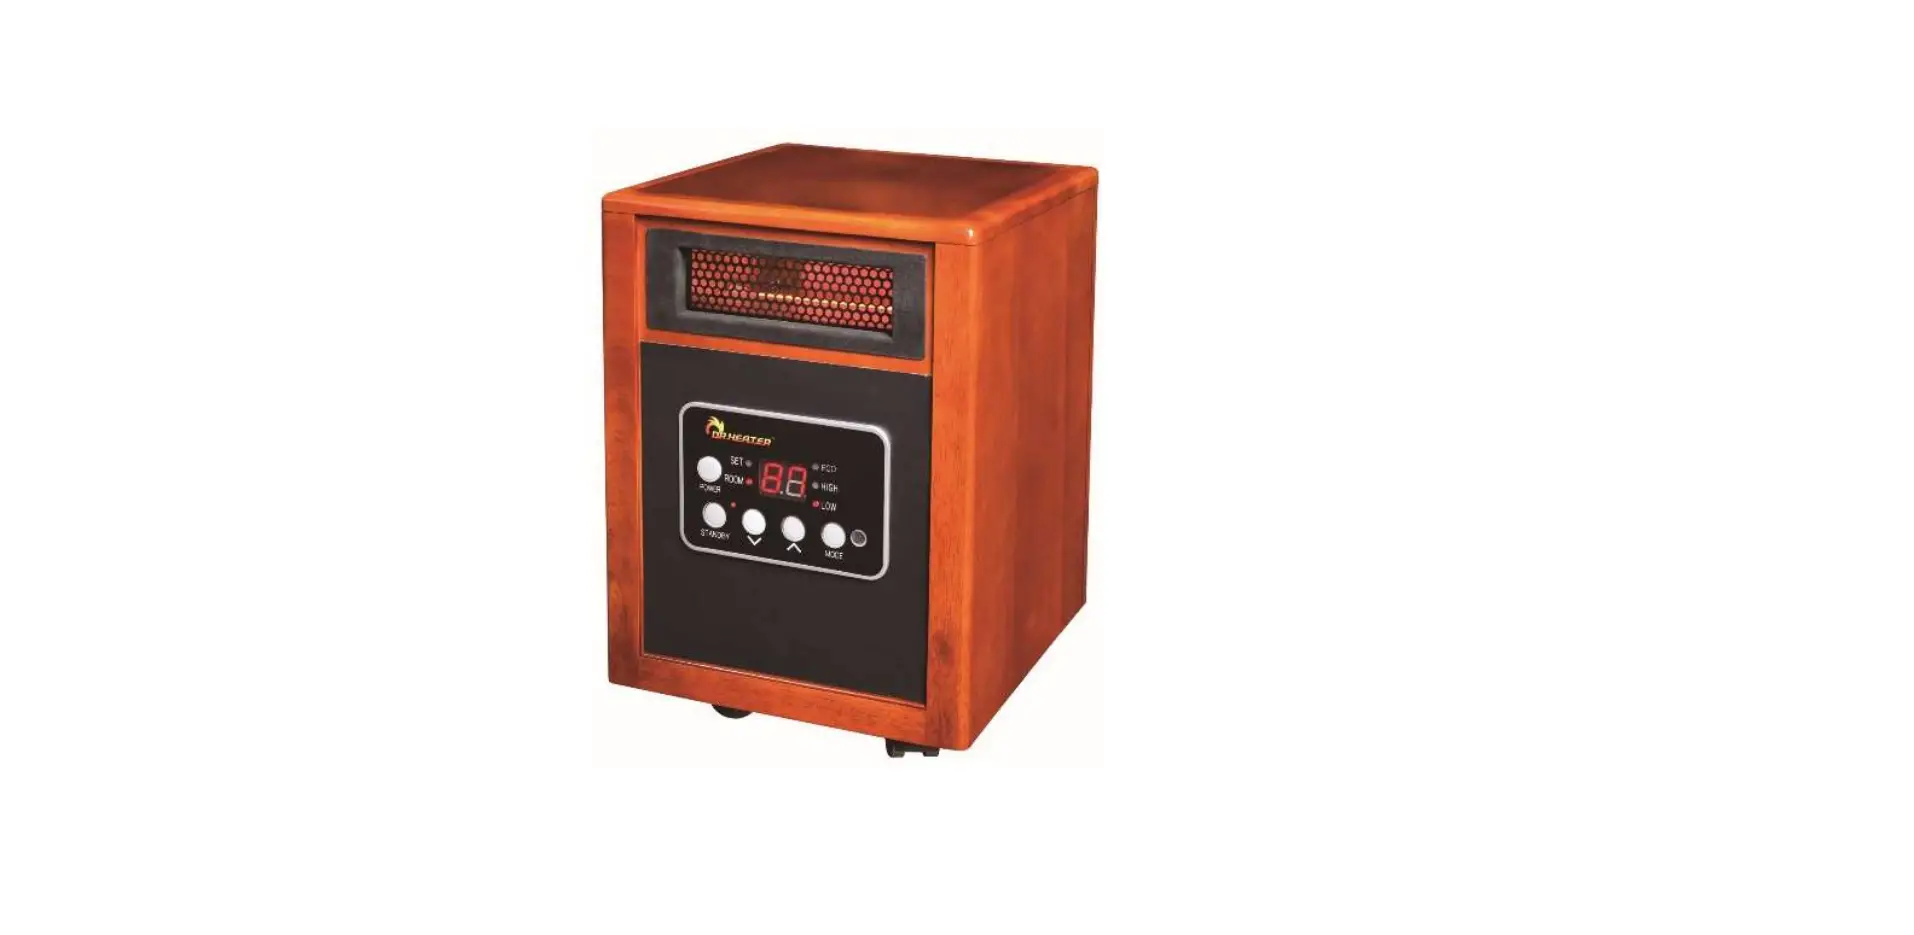 DR-968 Infrared Portable Space Heater